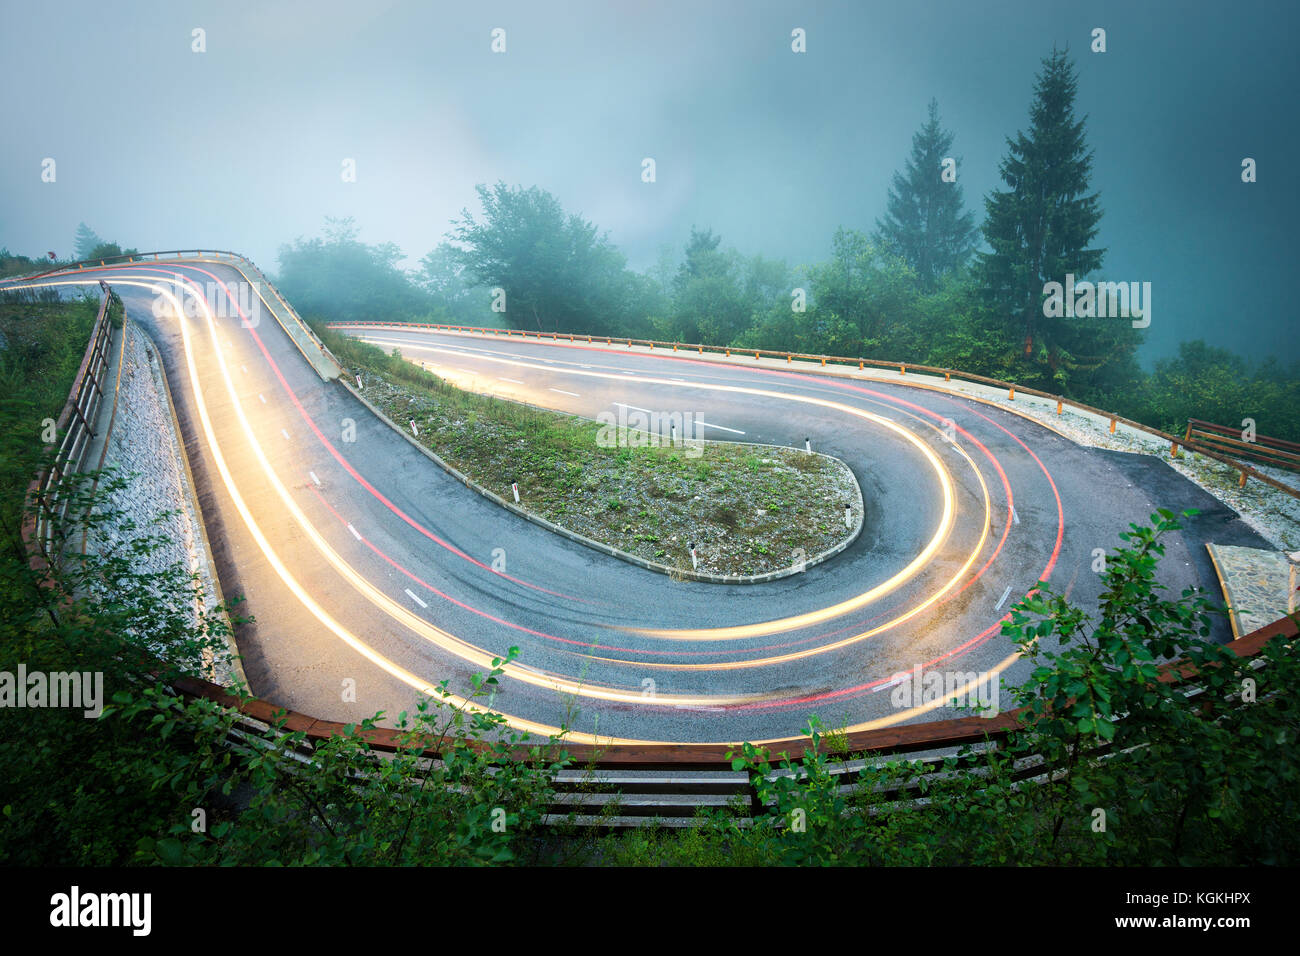 Winding mountain road with car lights. Foggy wet weather and low visibility. Alps, Slovenia. Stock Photo